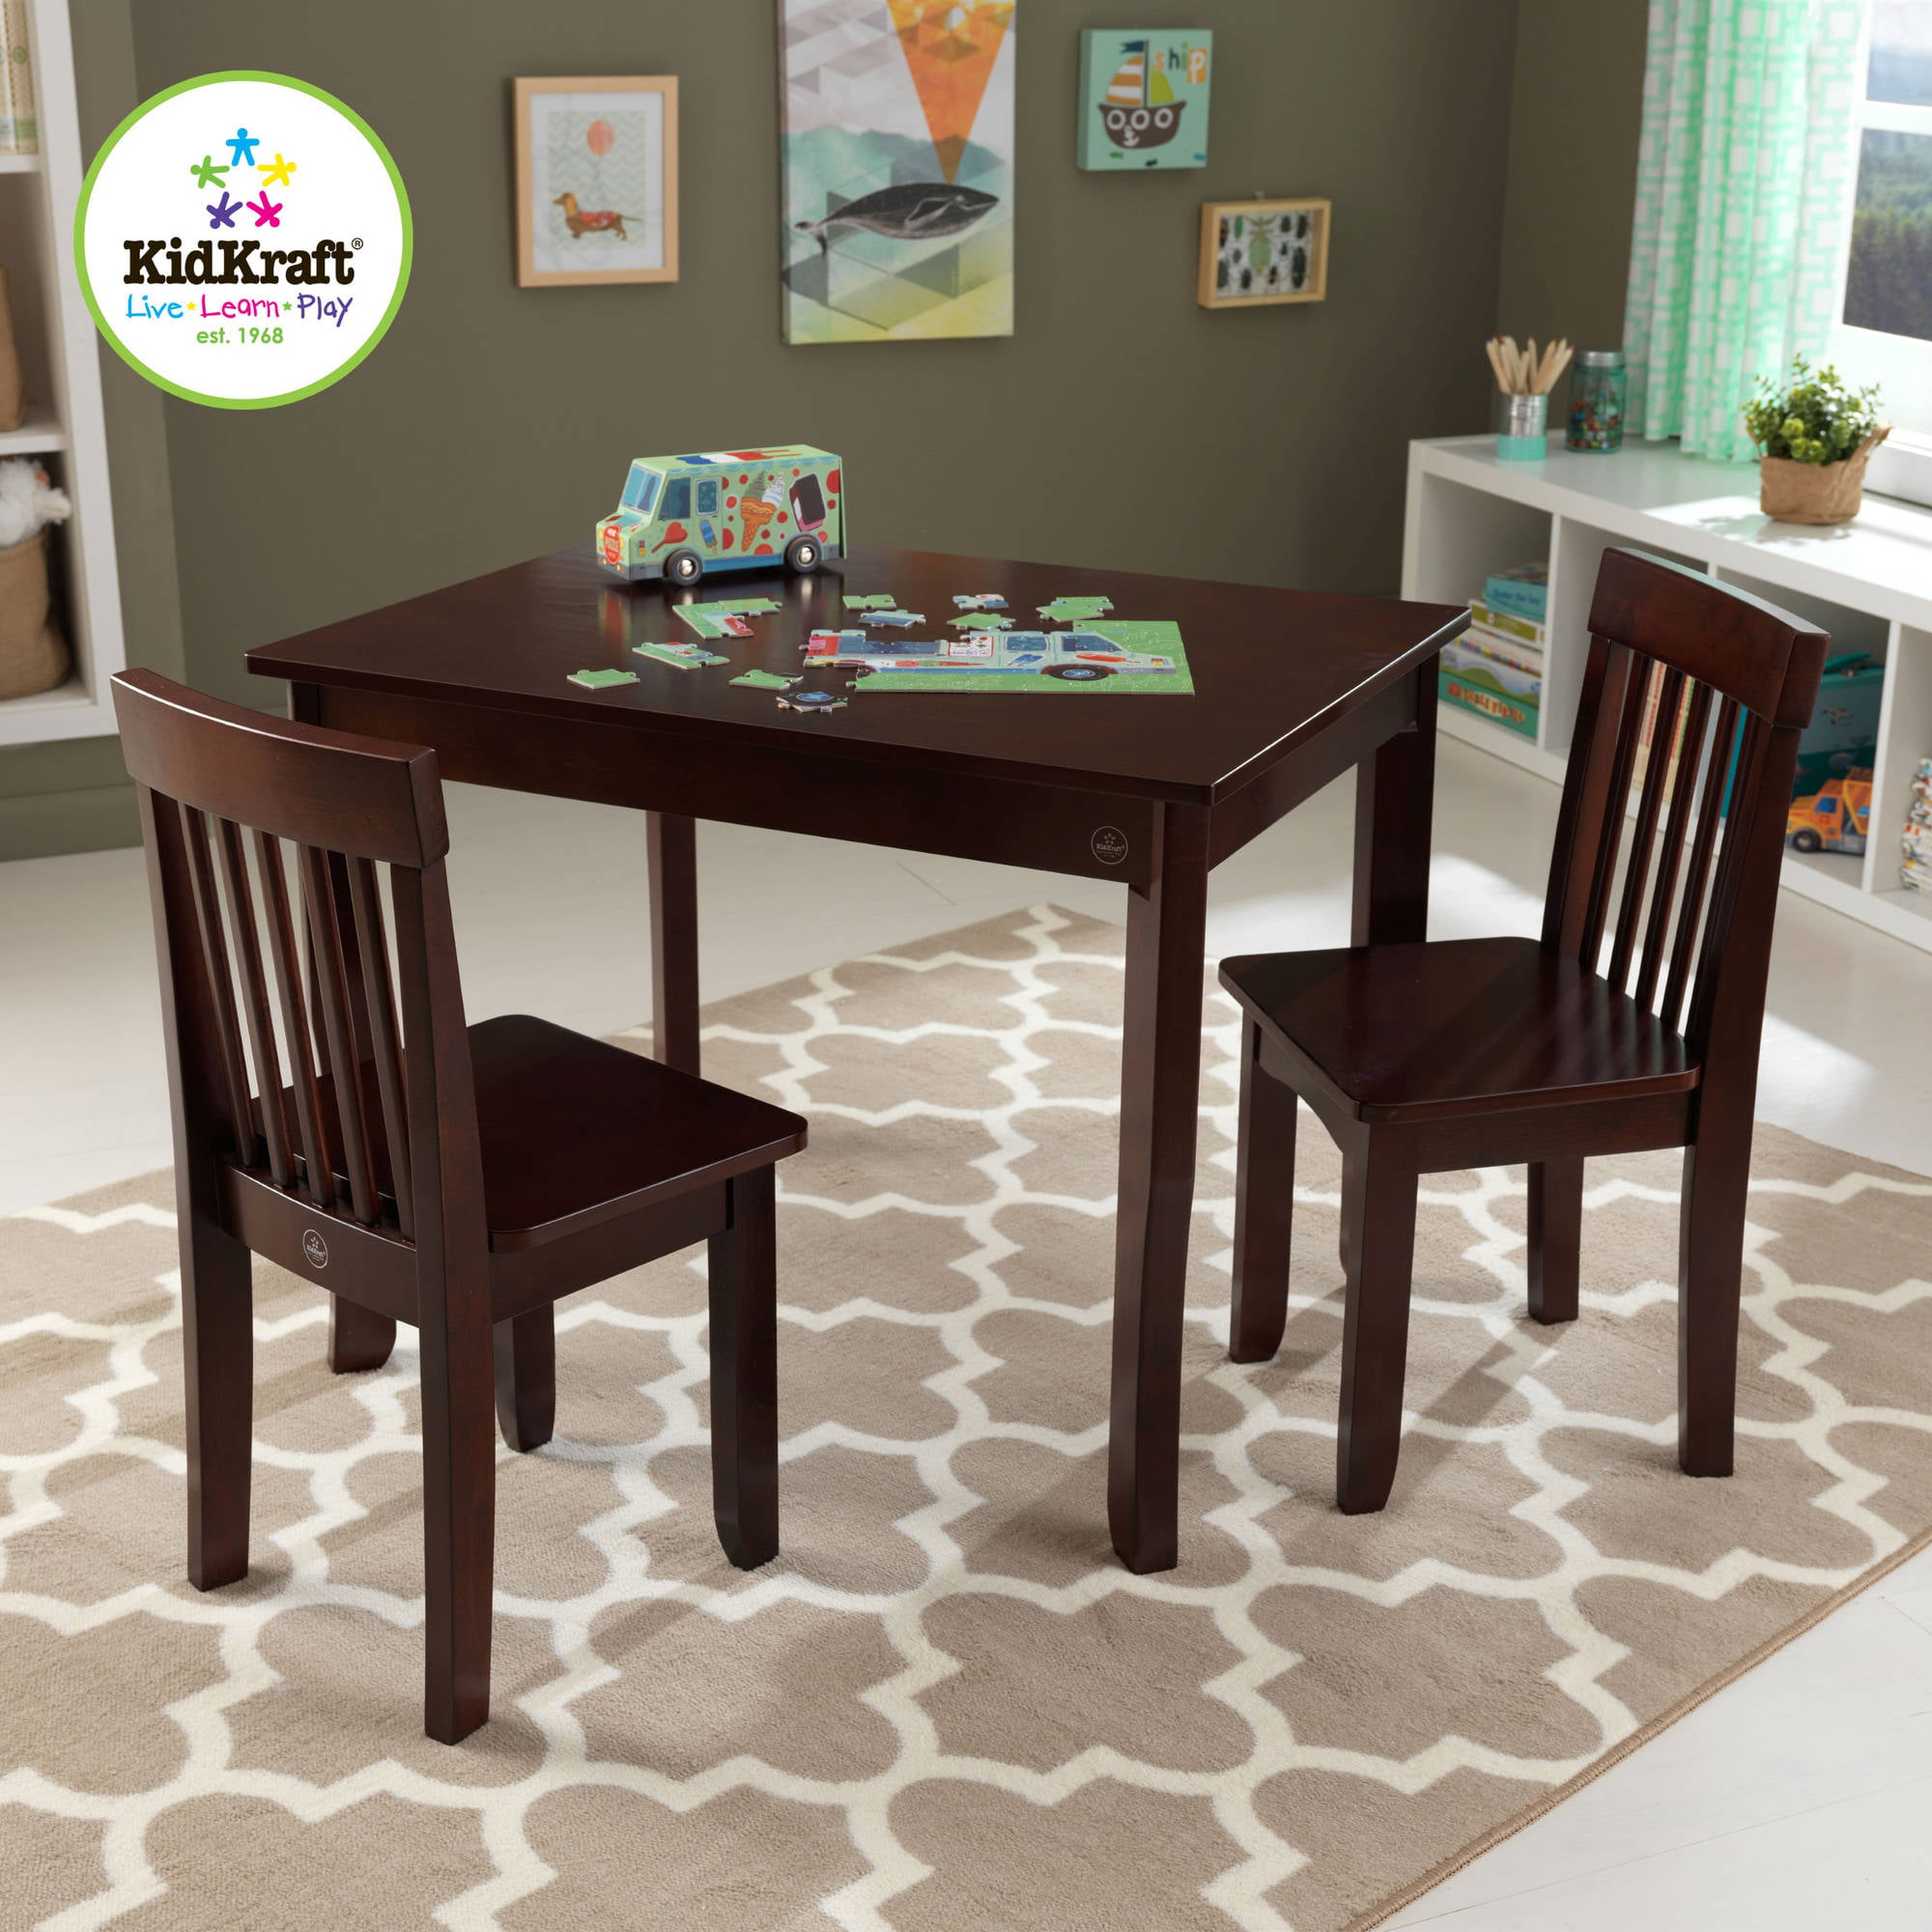 Kidkraft Modern Table 2 Chair Set Highlighter Walmart throughout Elegant  table and chair set for 2 with regard to Your home